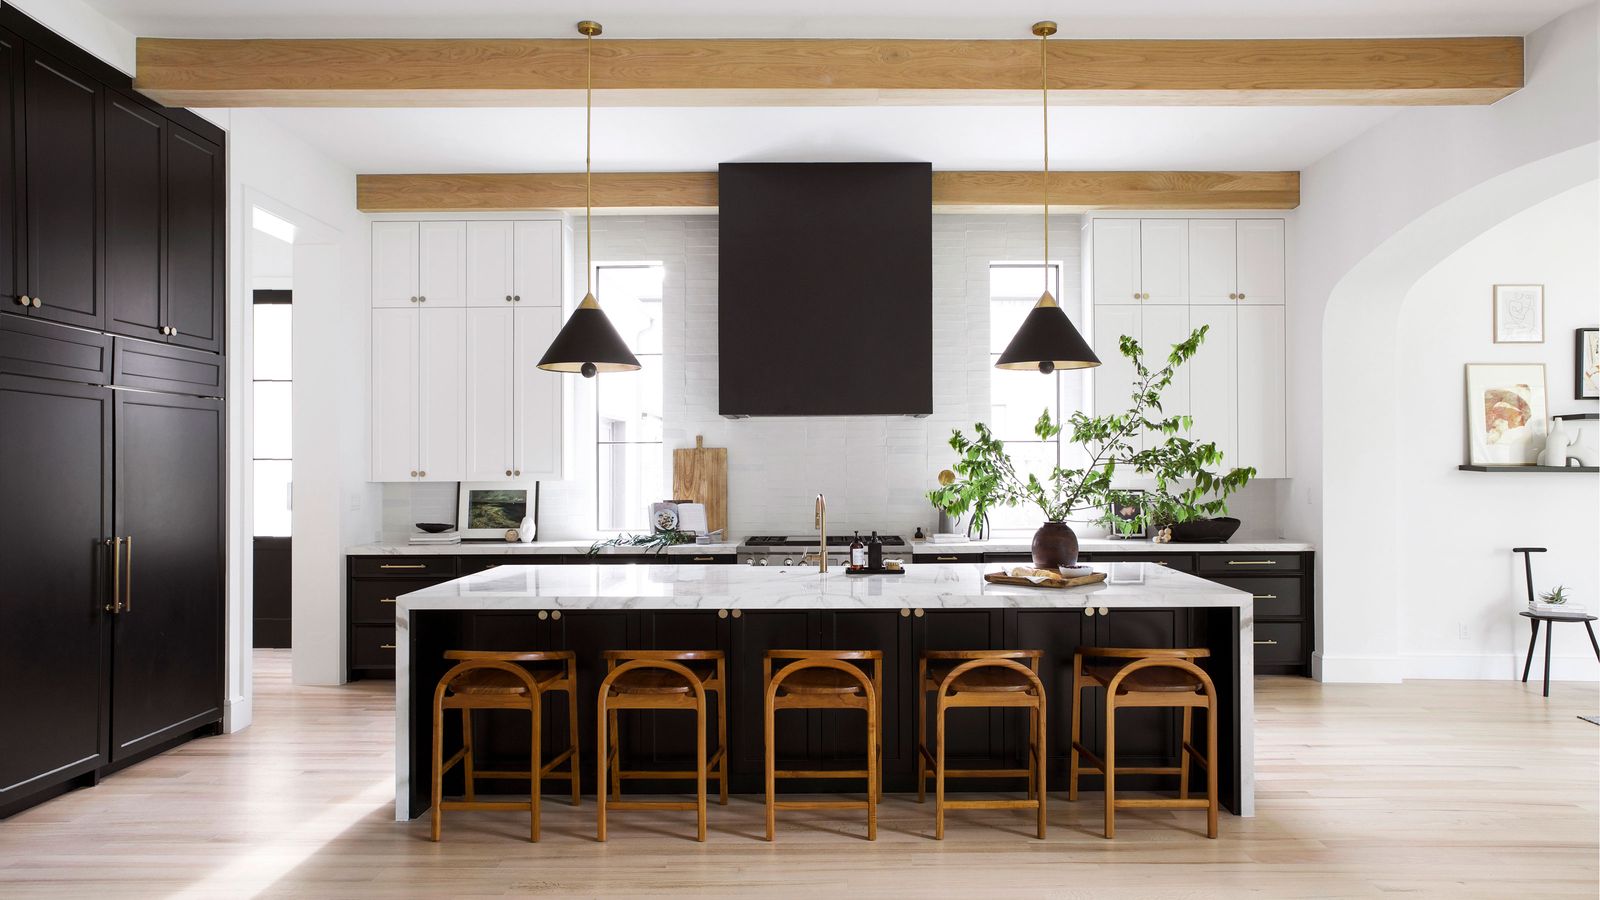 How to make high kitchen cabinets easier to reach